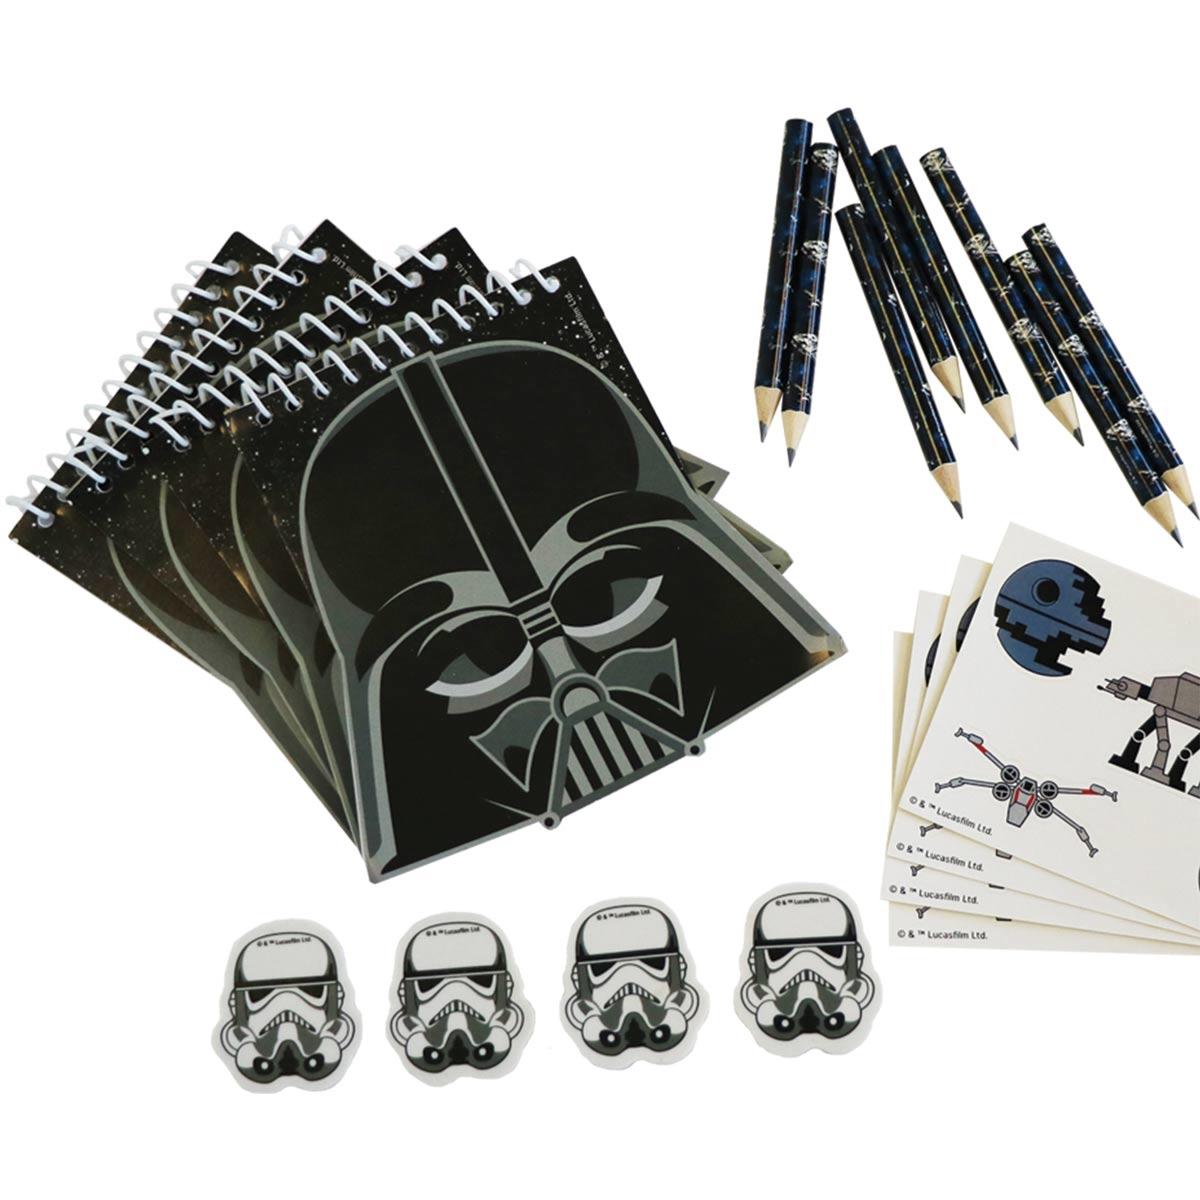 16pc Star Wars Stationery Pack by Amscan 9903095 incls, notepads, pencils, sticker sheets and erasers. Available from a collection of Star Wars party items here at Karnival Costumes online party shop.